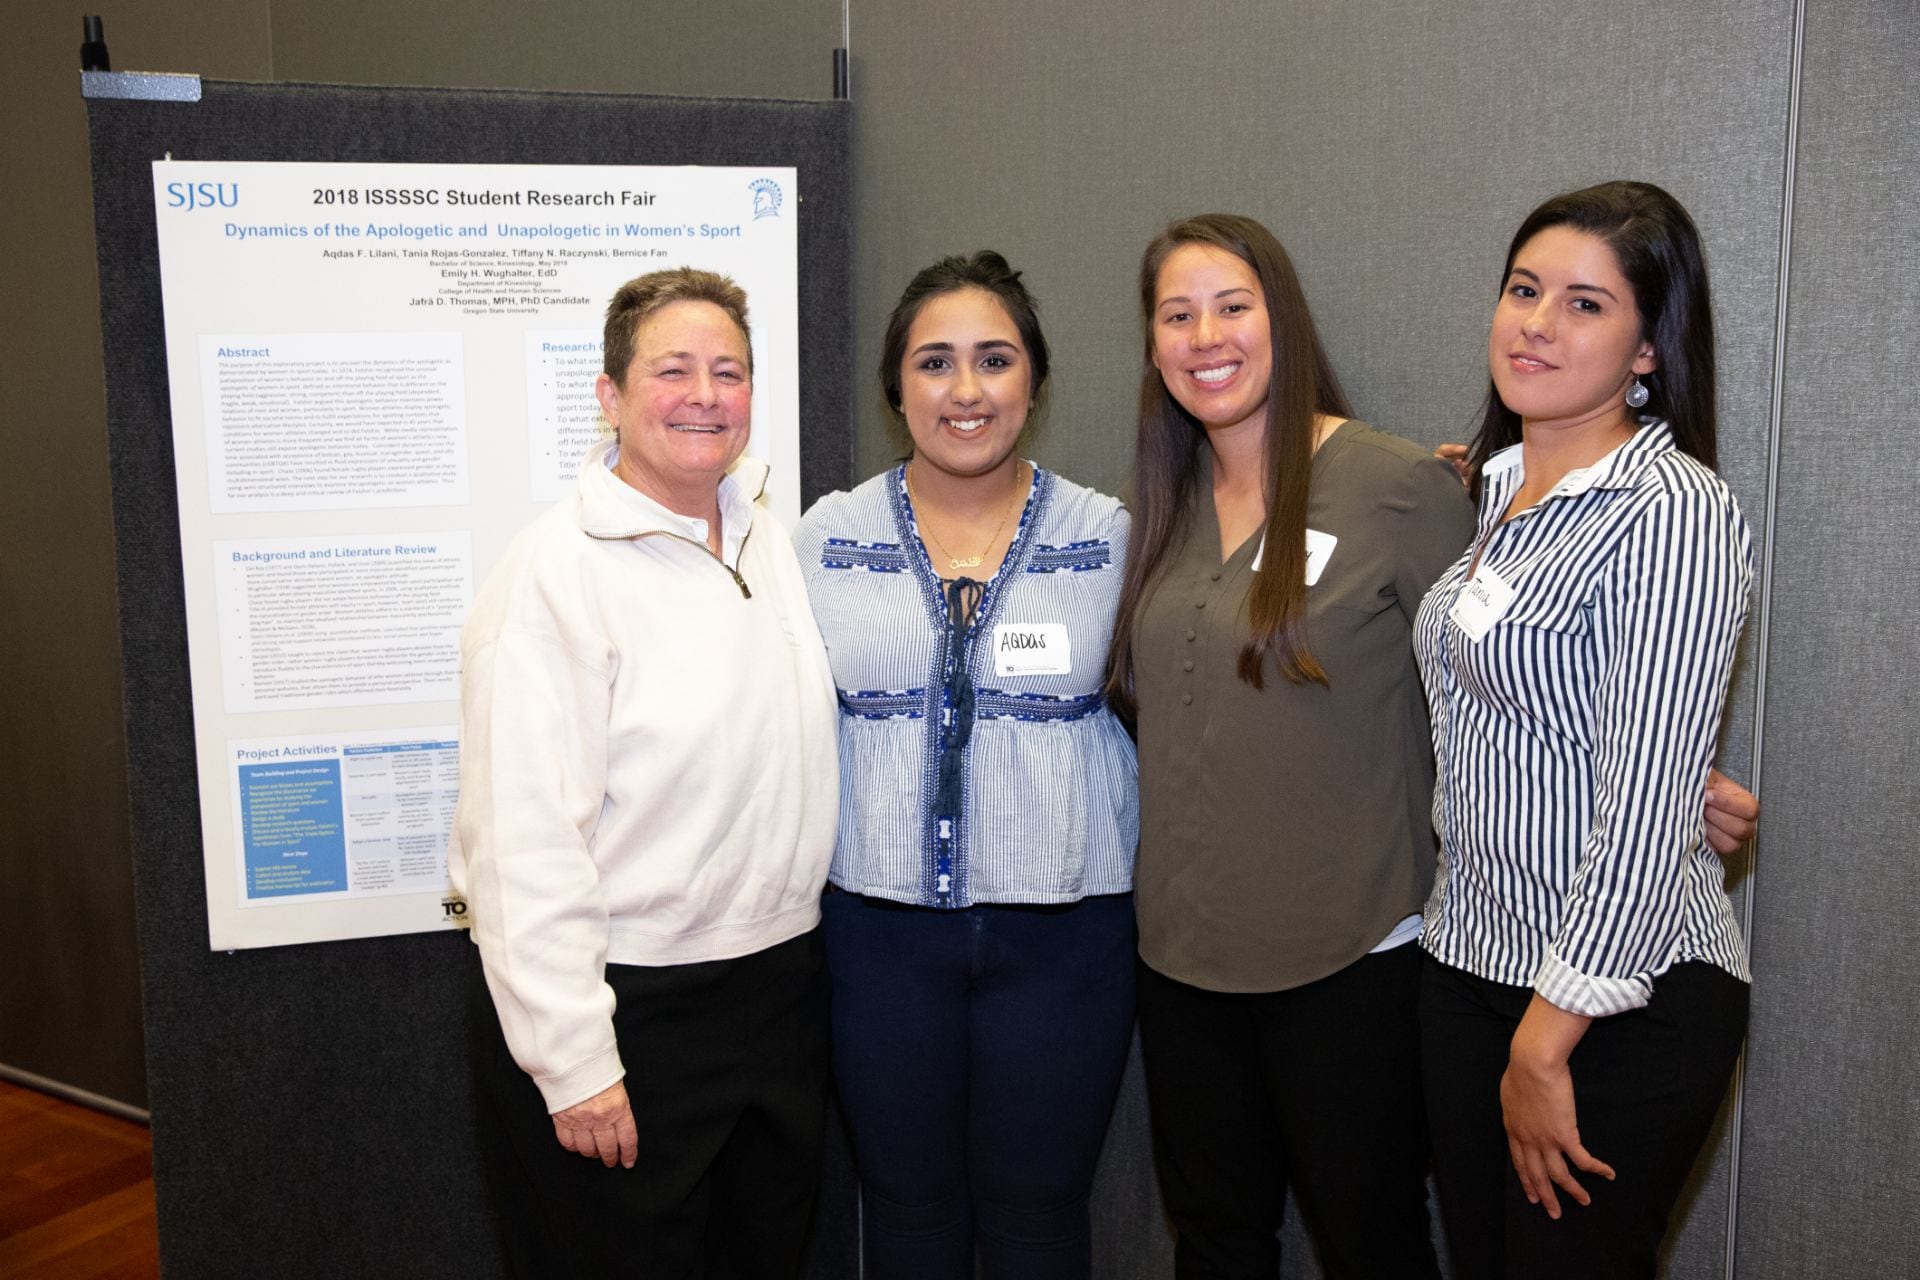 Professor Emily Wughalter, Aqdas Lilani, Tiffany Raczynski and Tania Rojas pose for a photo at the Institute for the Study of Sport, Society and Social Change Student Research Fair in 2018. Photo by David Schmitz 